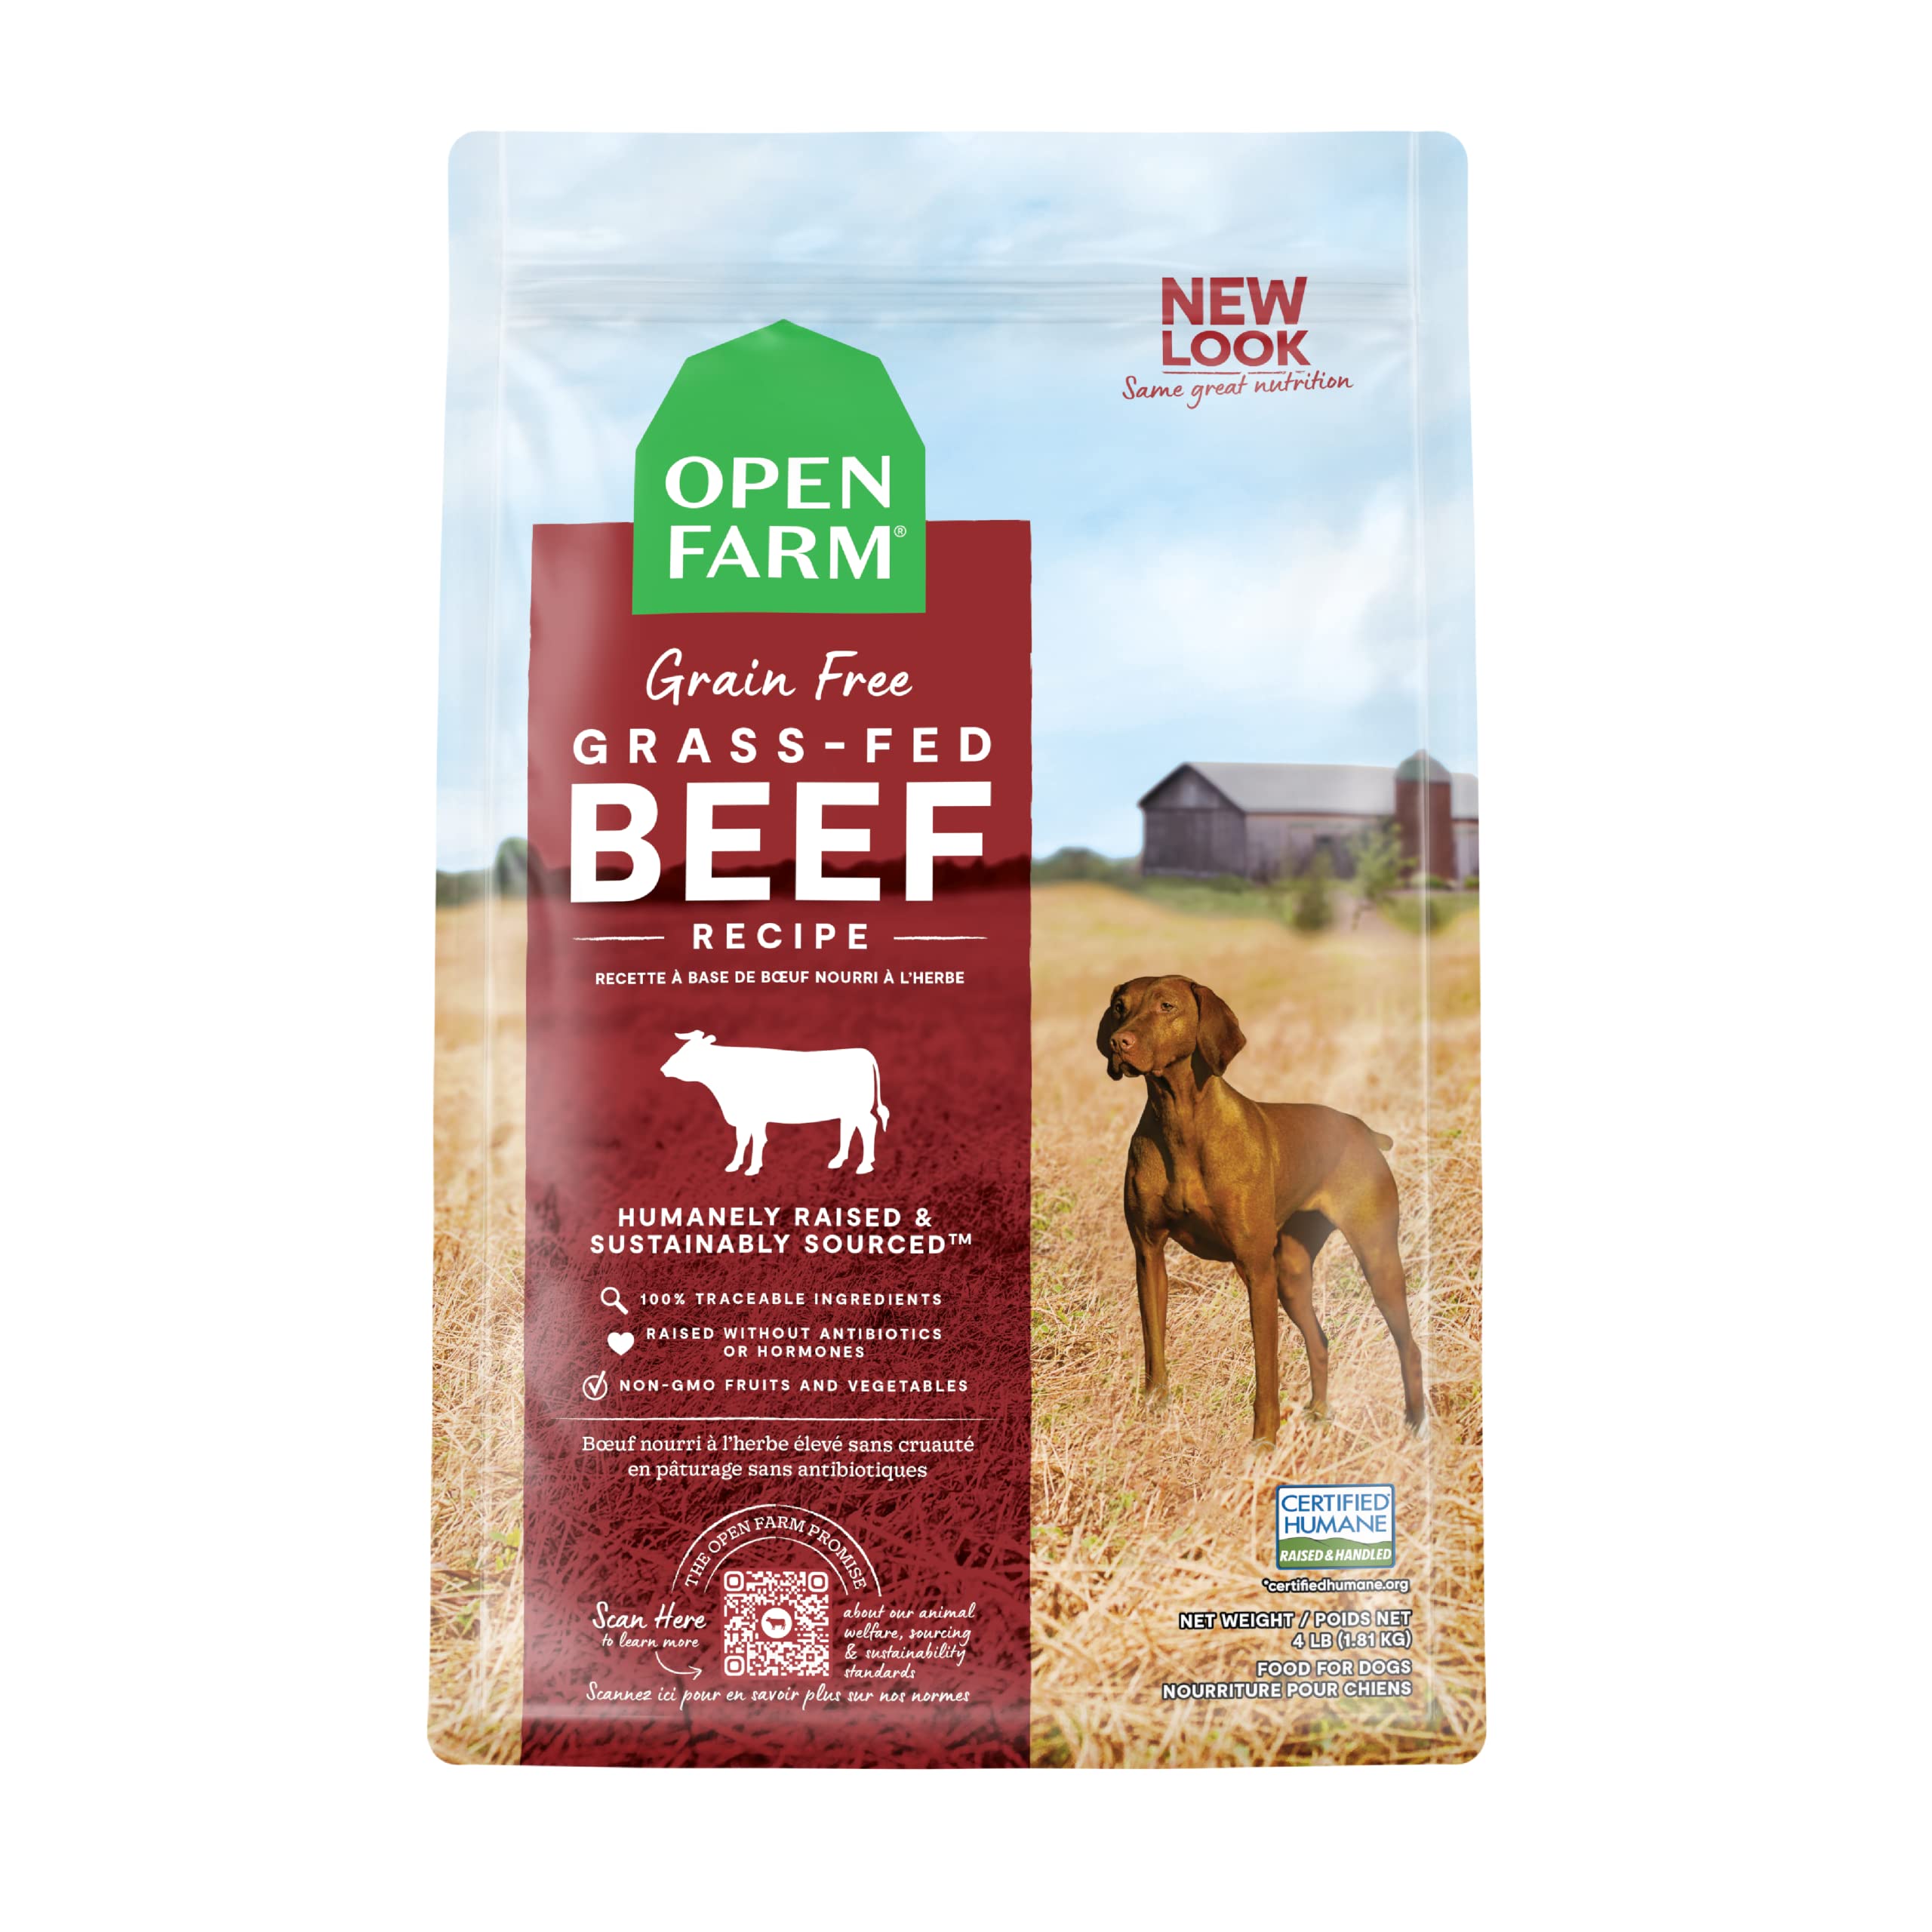 Open Farm Grain-Free Dry Dog Food, Humanely Raised Meat Recipe with Non-GMO Superfoods and No Artificial Flavors or Preservatives